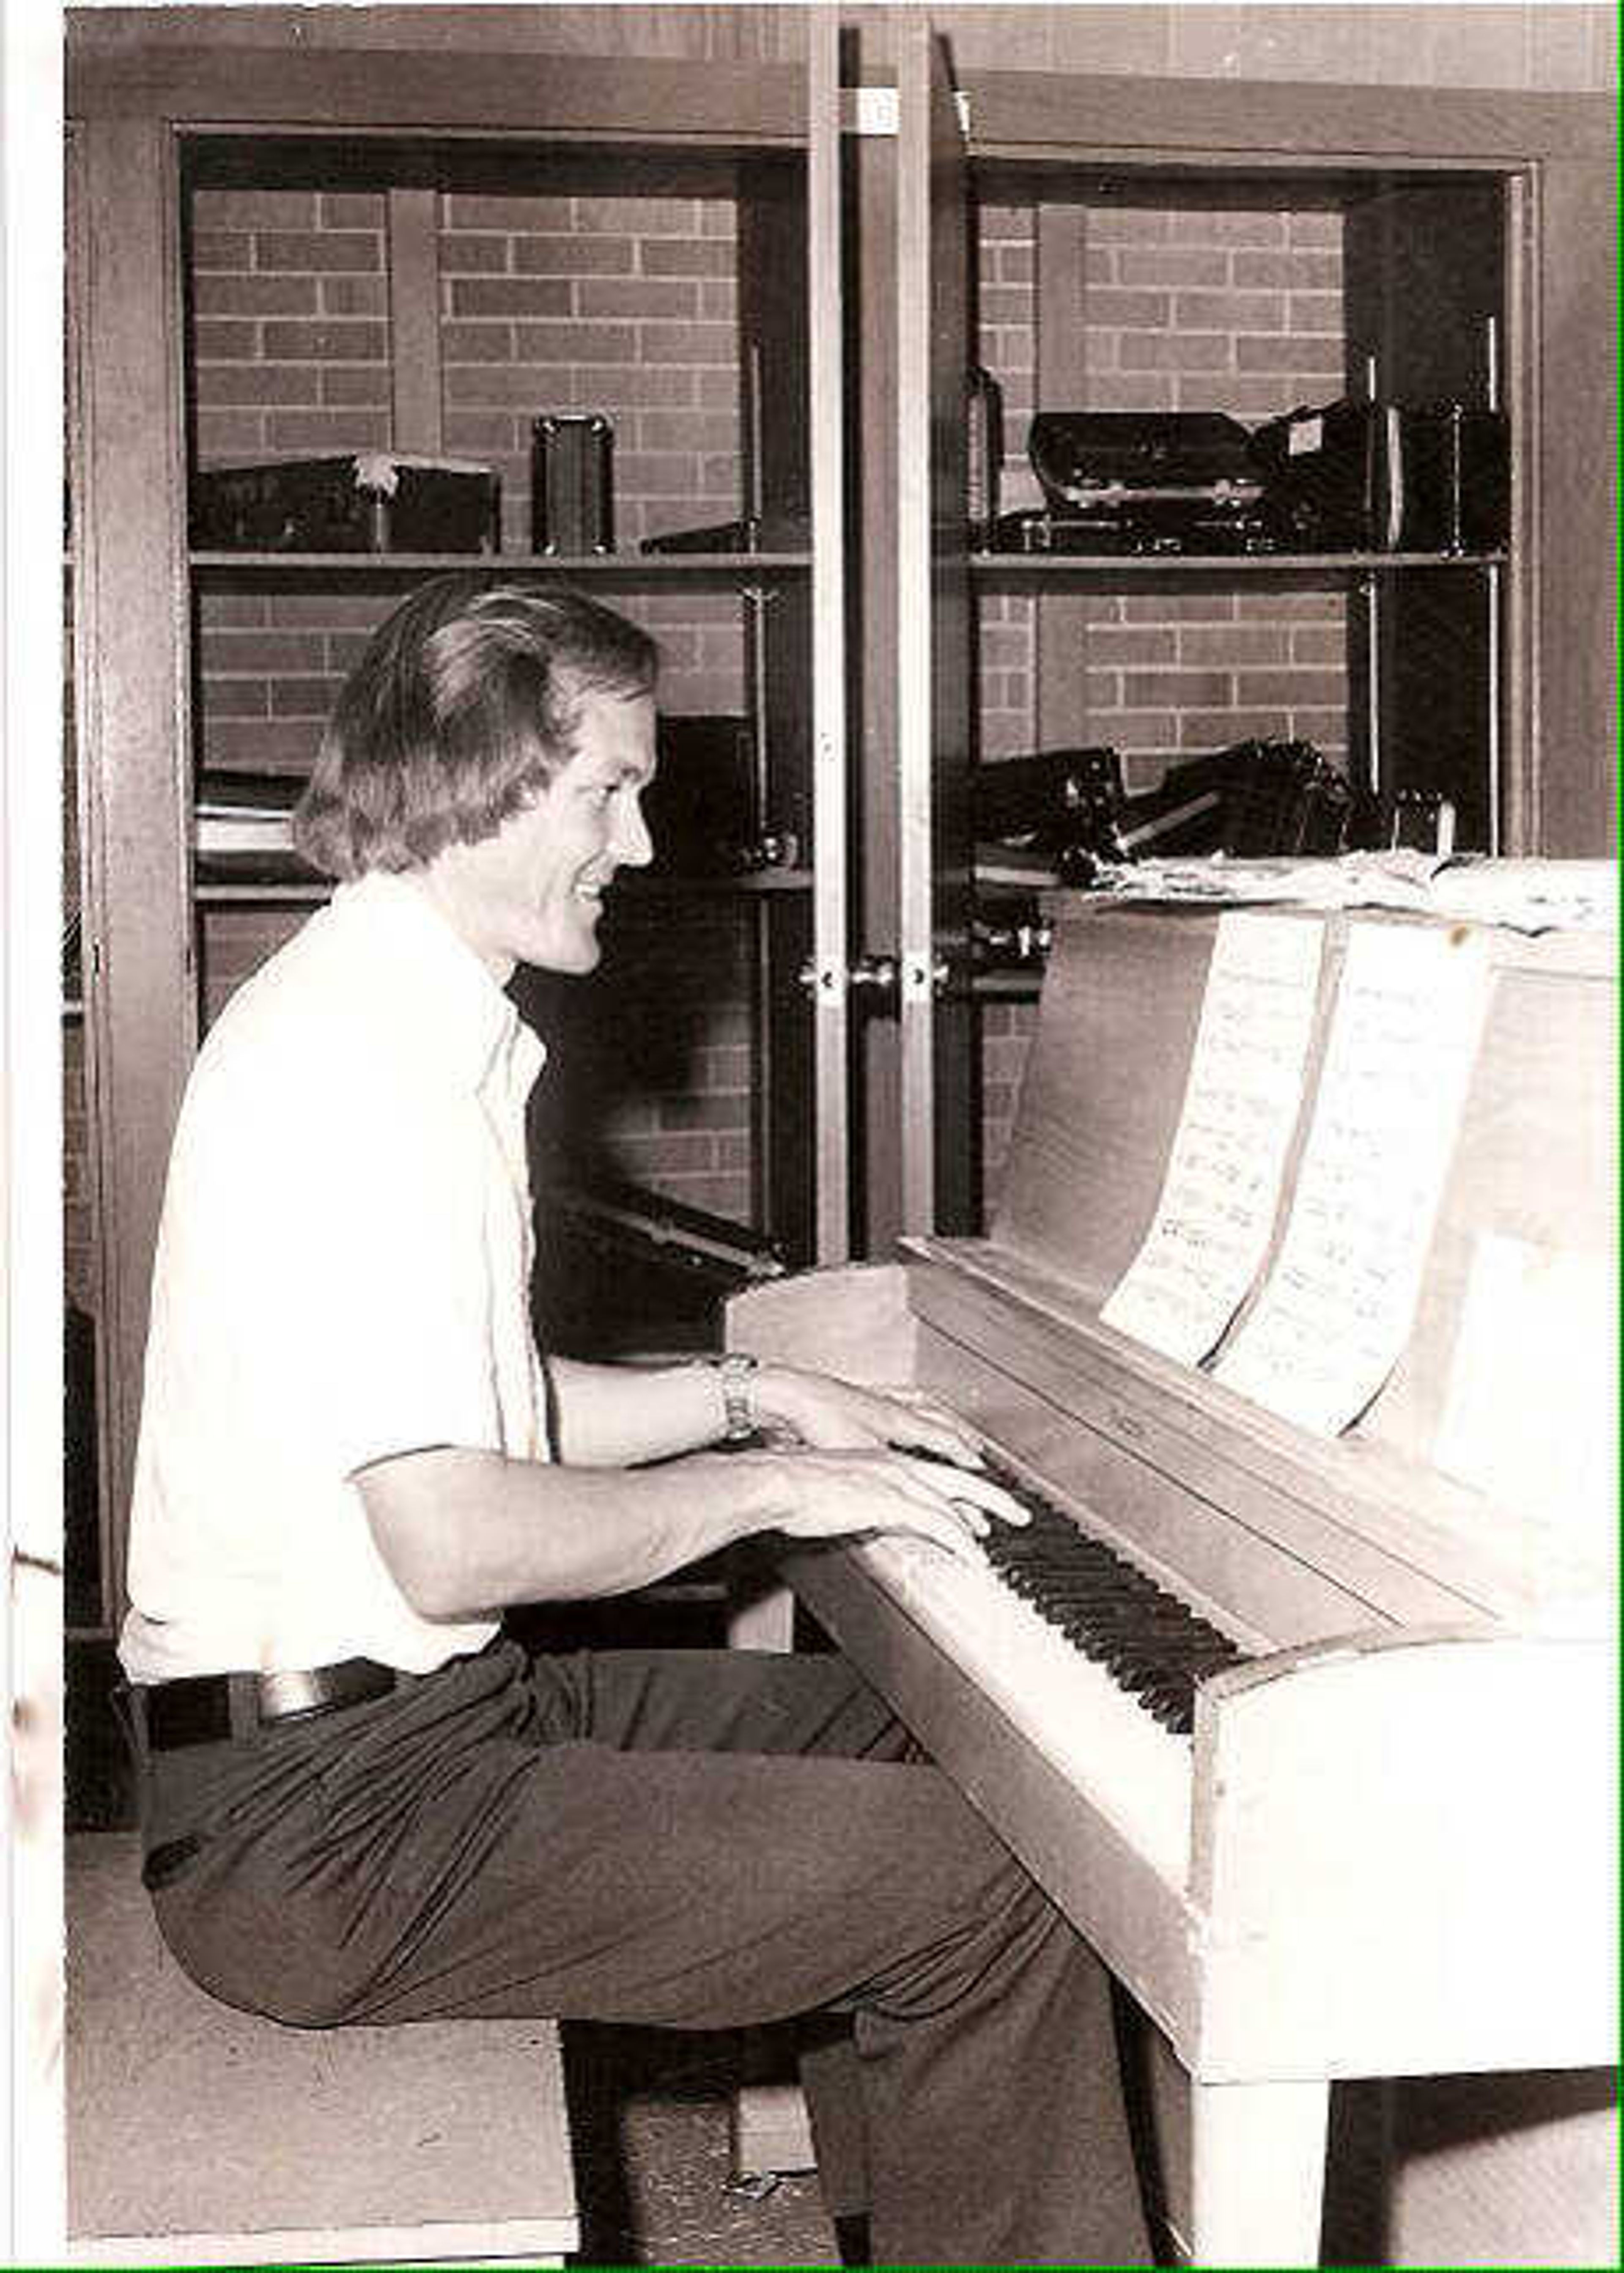 As band director at Kennett High School, Nail played the piano for students after rehearsal in the late 1970s. He said that he’d take requests from students and they’d often try to challenge him by requesting songs they thought he couldn’t play.